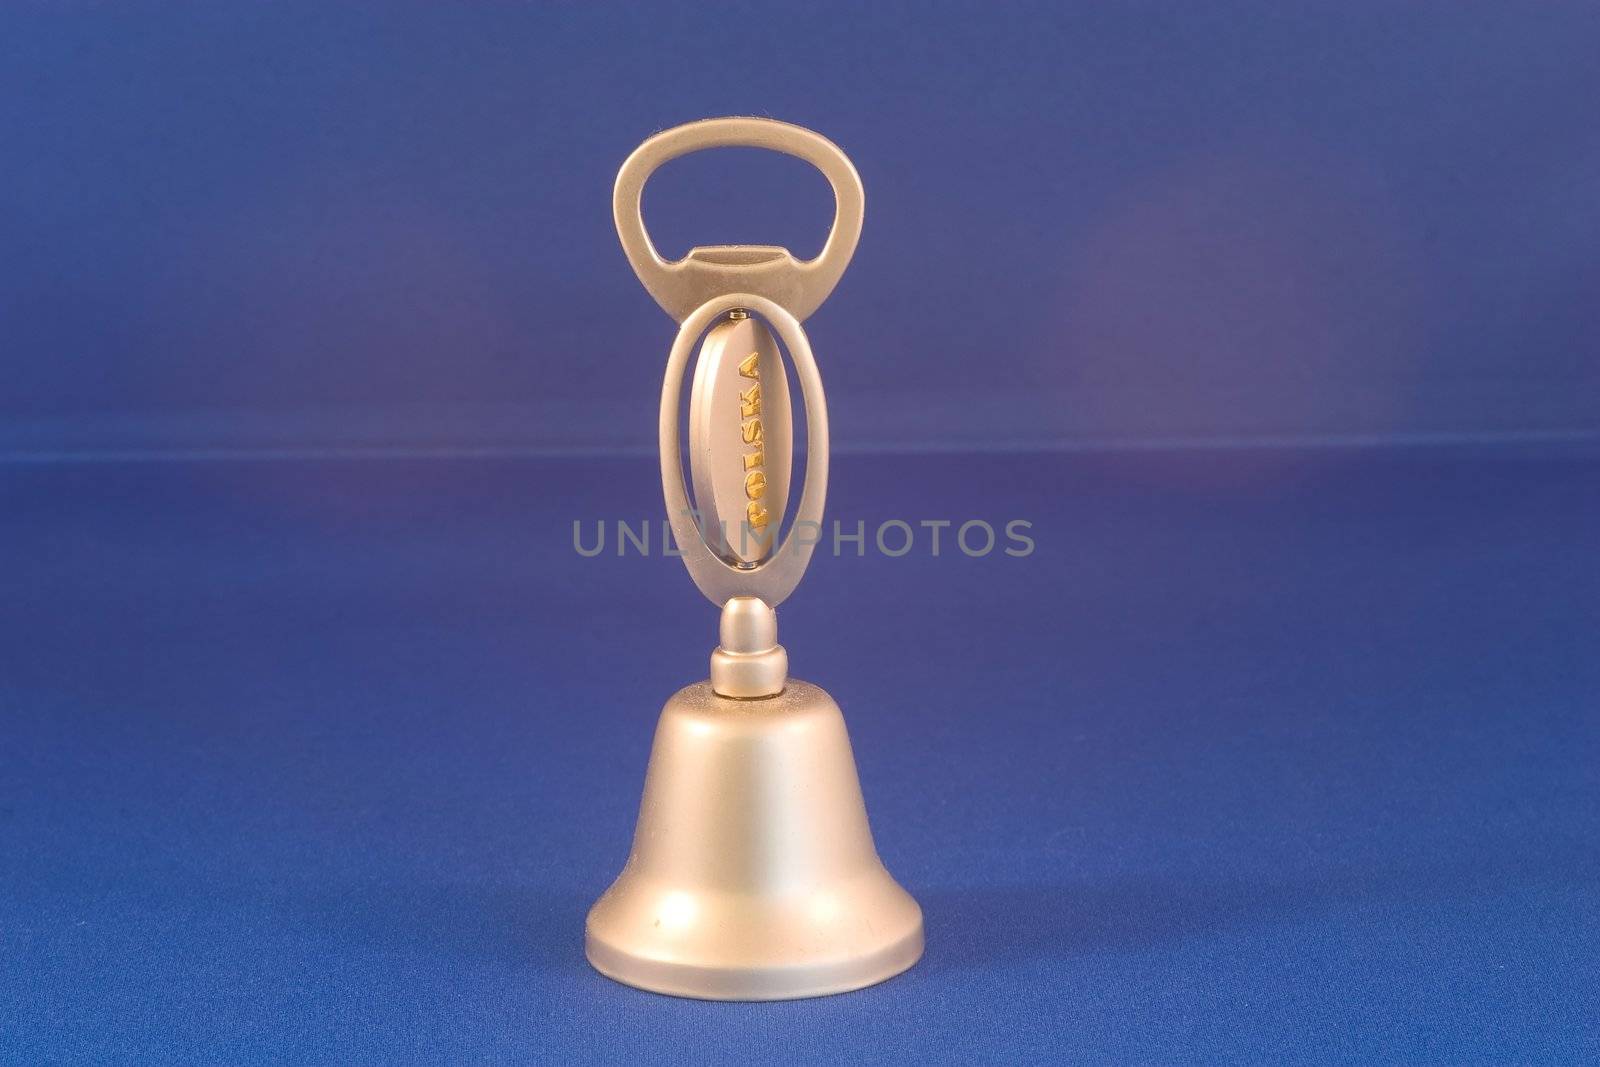 A handbell is a bell designed to be rung by hand